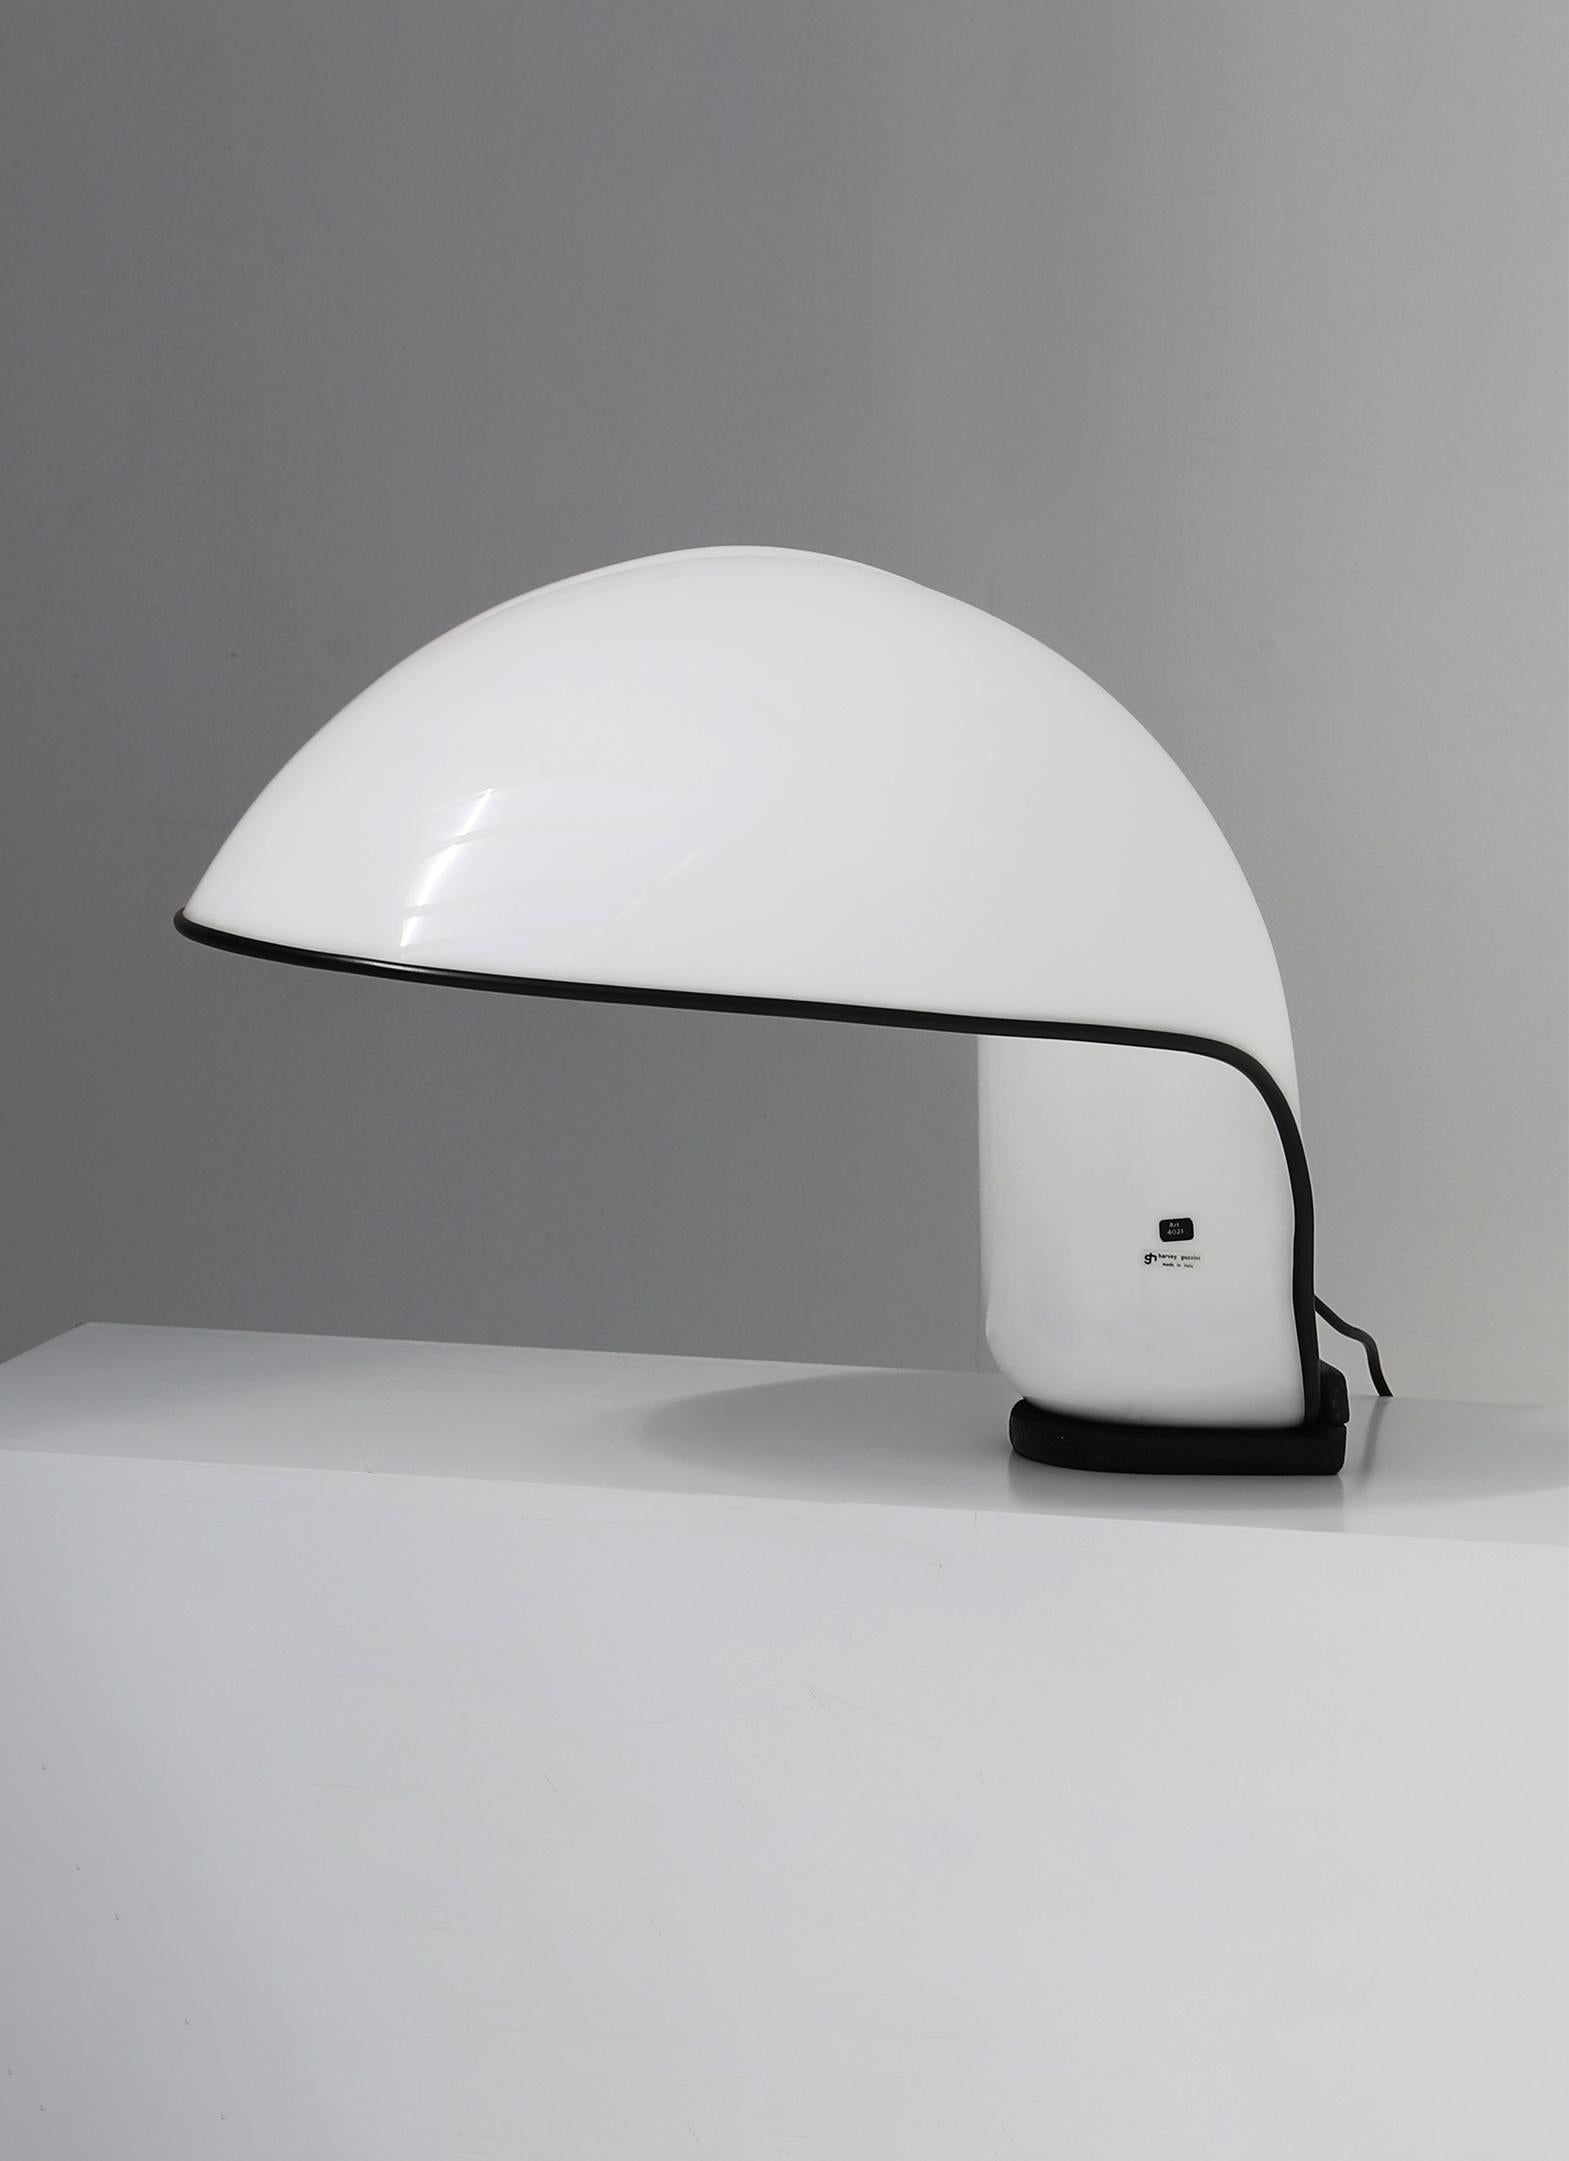 Albanella table lamp designed by Sergio Brazzoli and Ermanno Lampa in 1973 for Harvey Guzzini. This space age sculptural lamp attests the design of the 1970s with its sleek futuristic design and materials. The lamp is made out of a white plastic